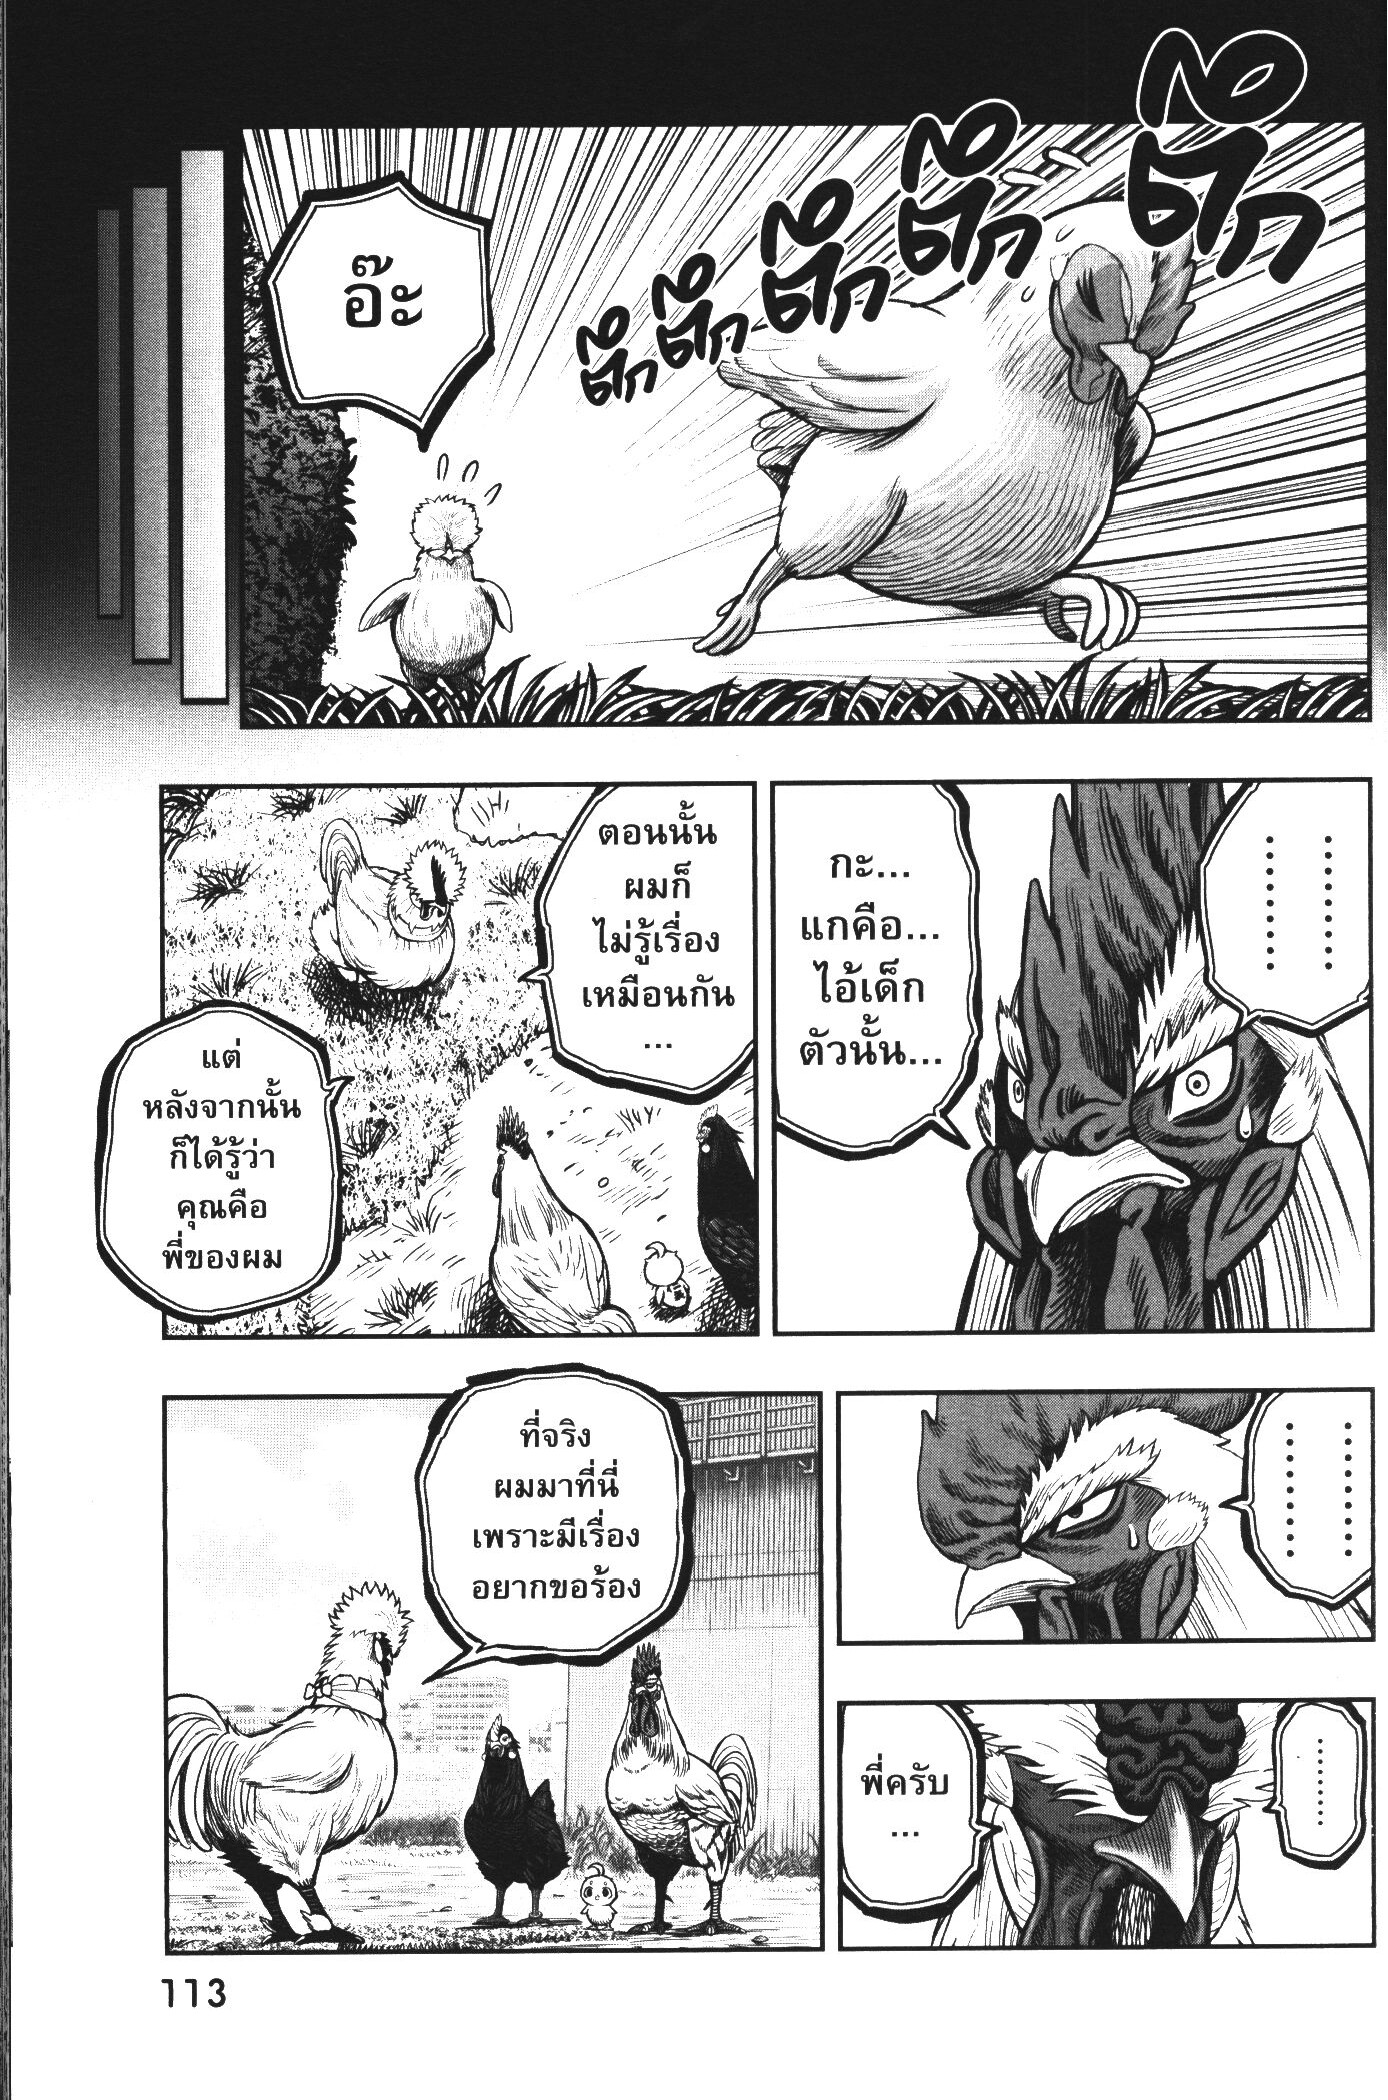 Rooster Fighter 19 (15)